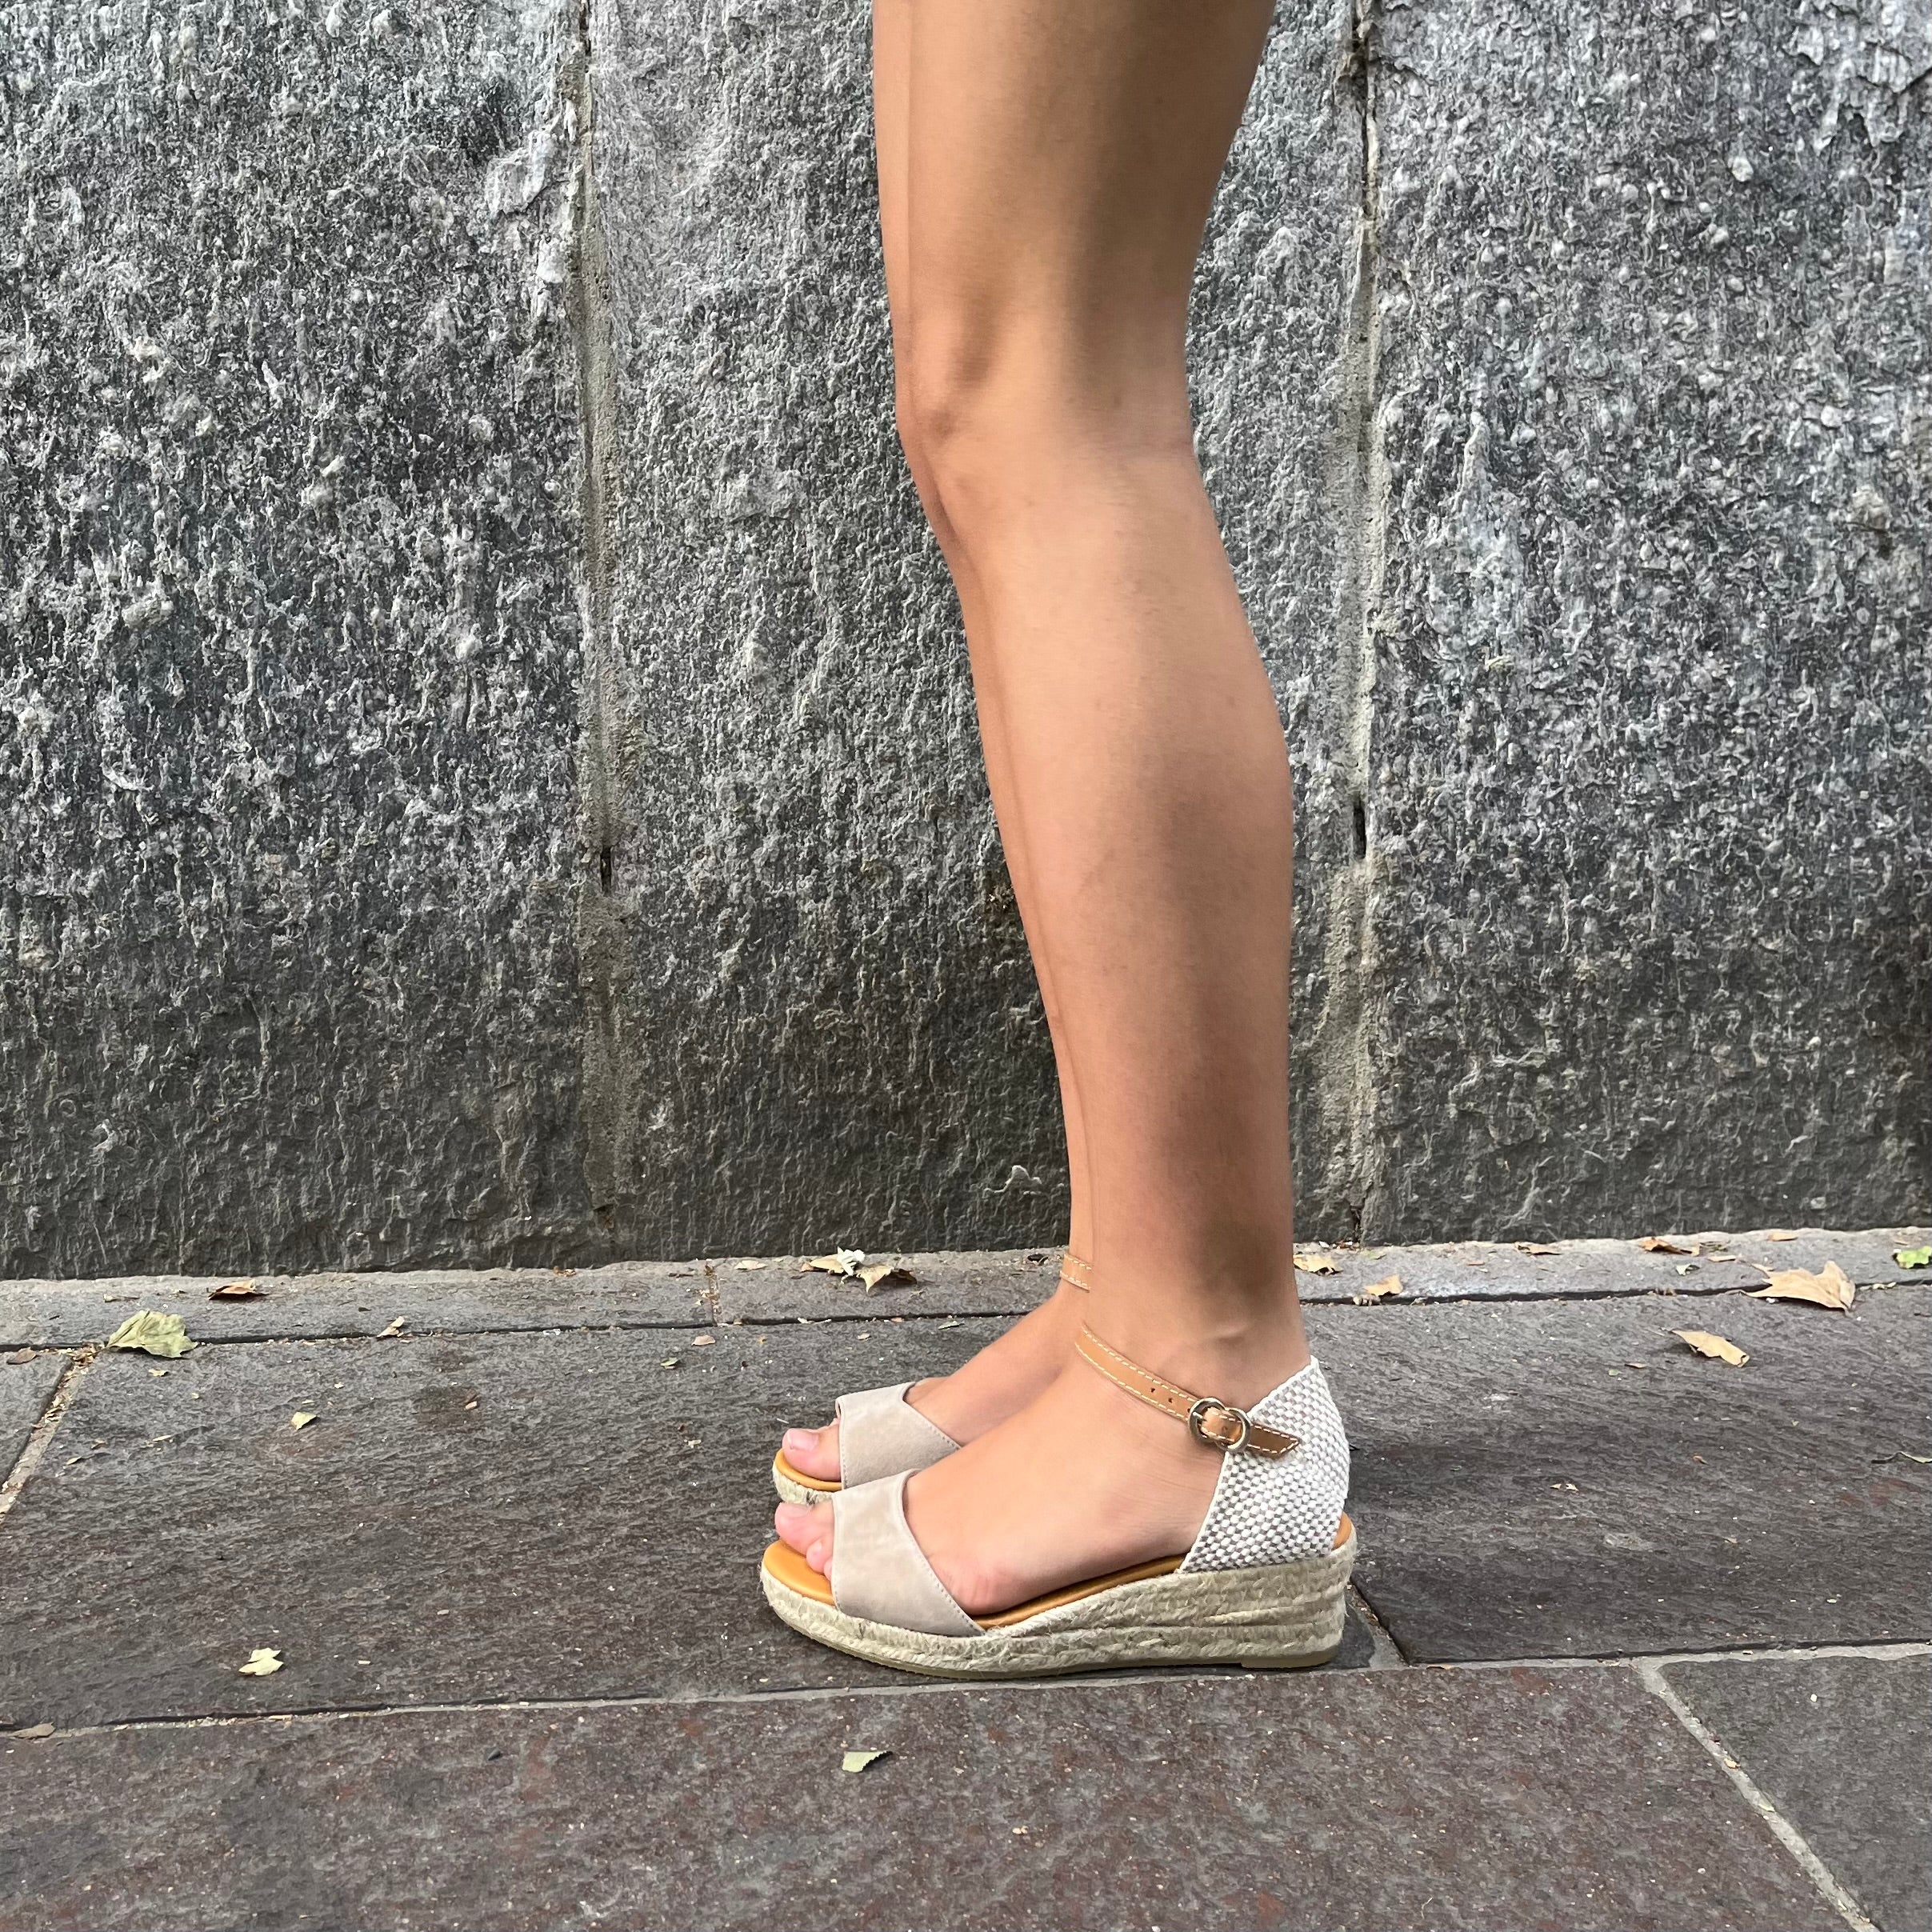 Sandal espadrilles in taupe suede